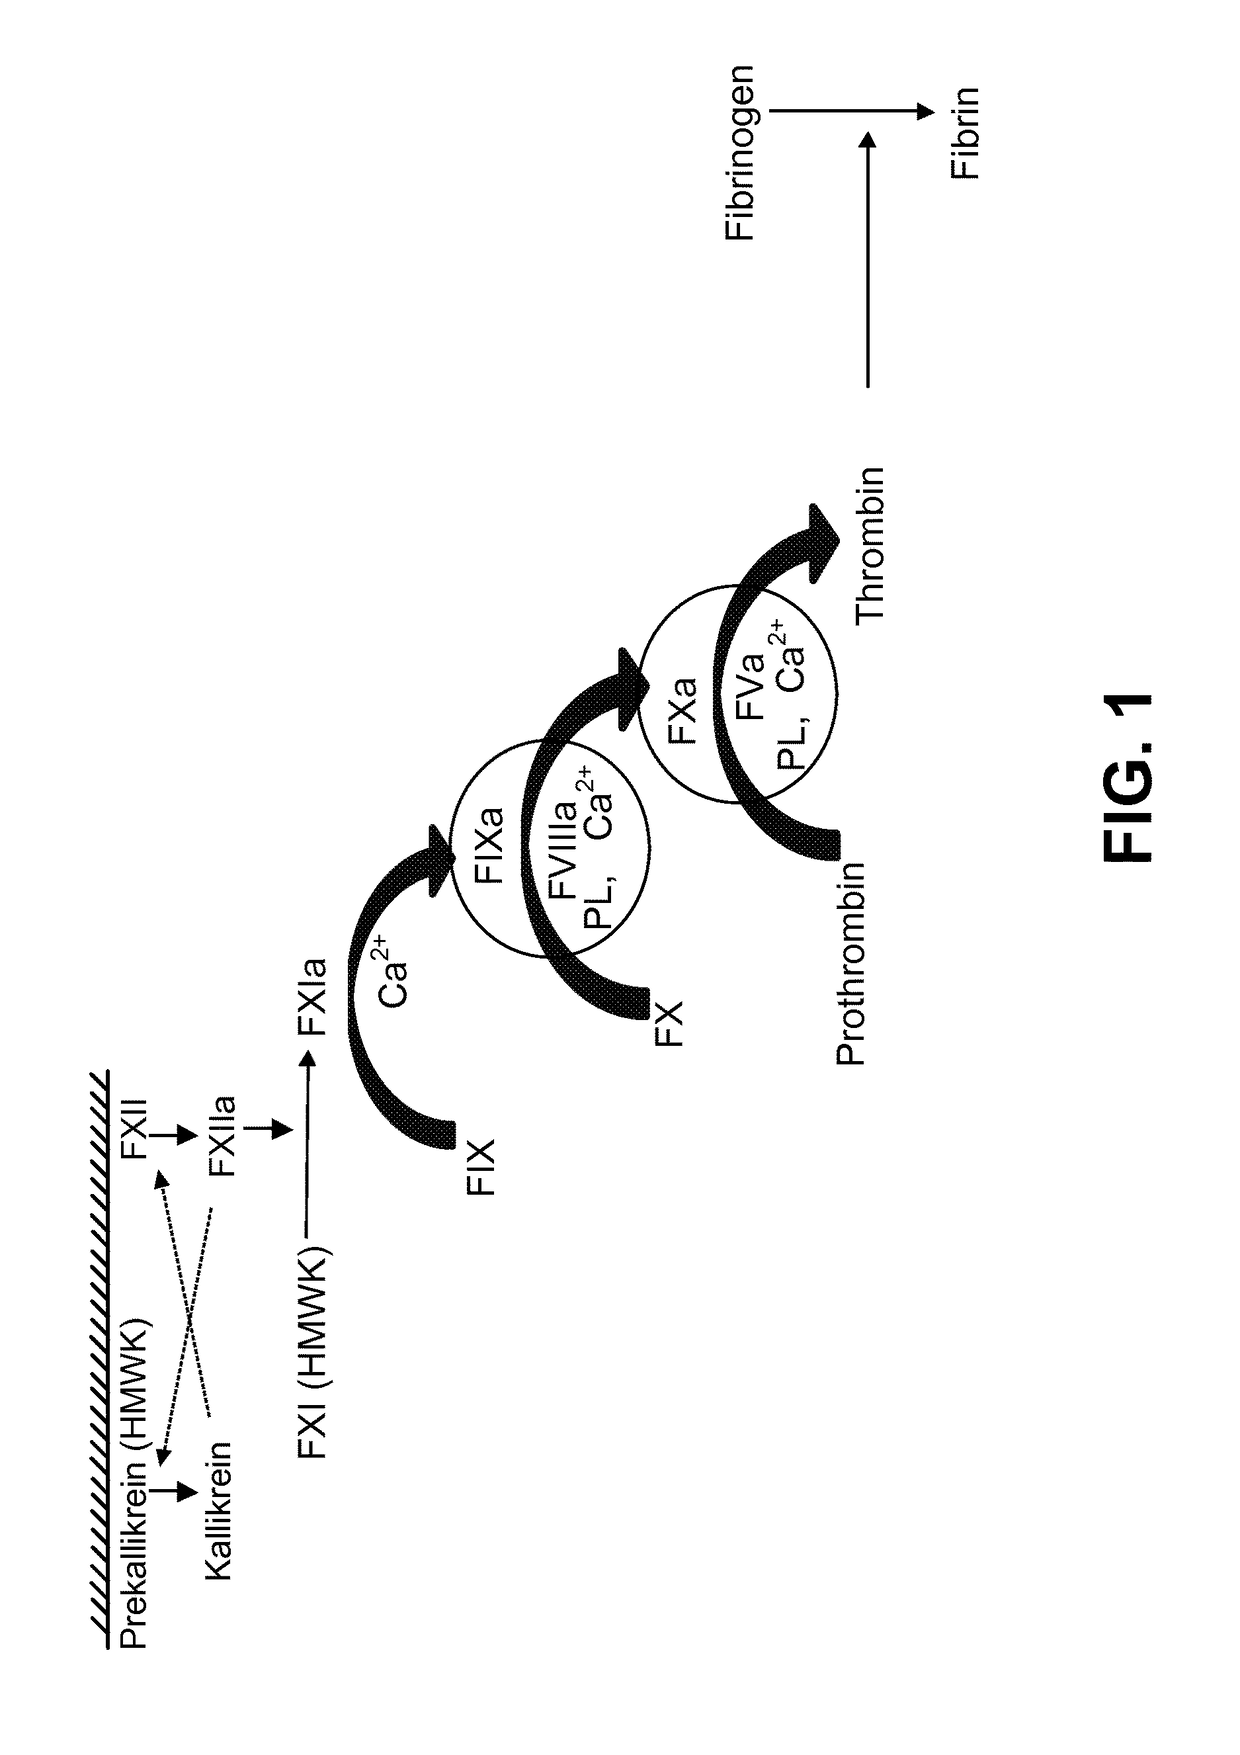 Blood factor monitoring assay and uses thereof